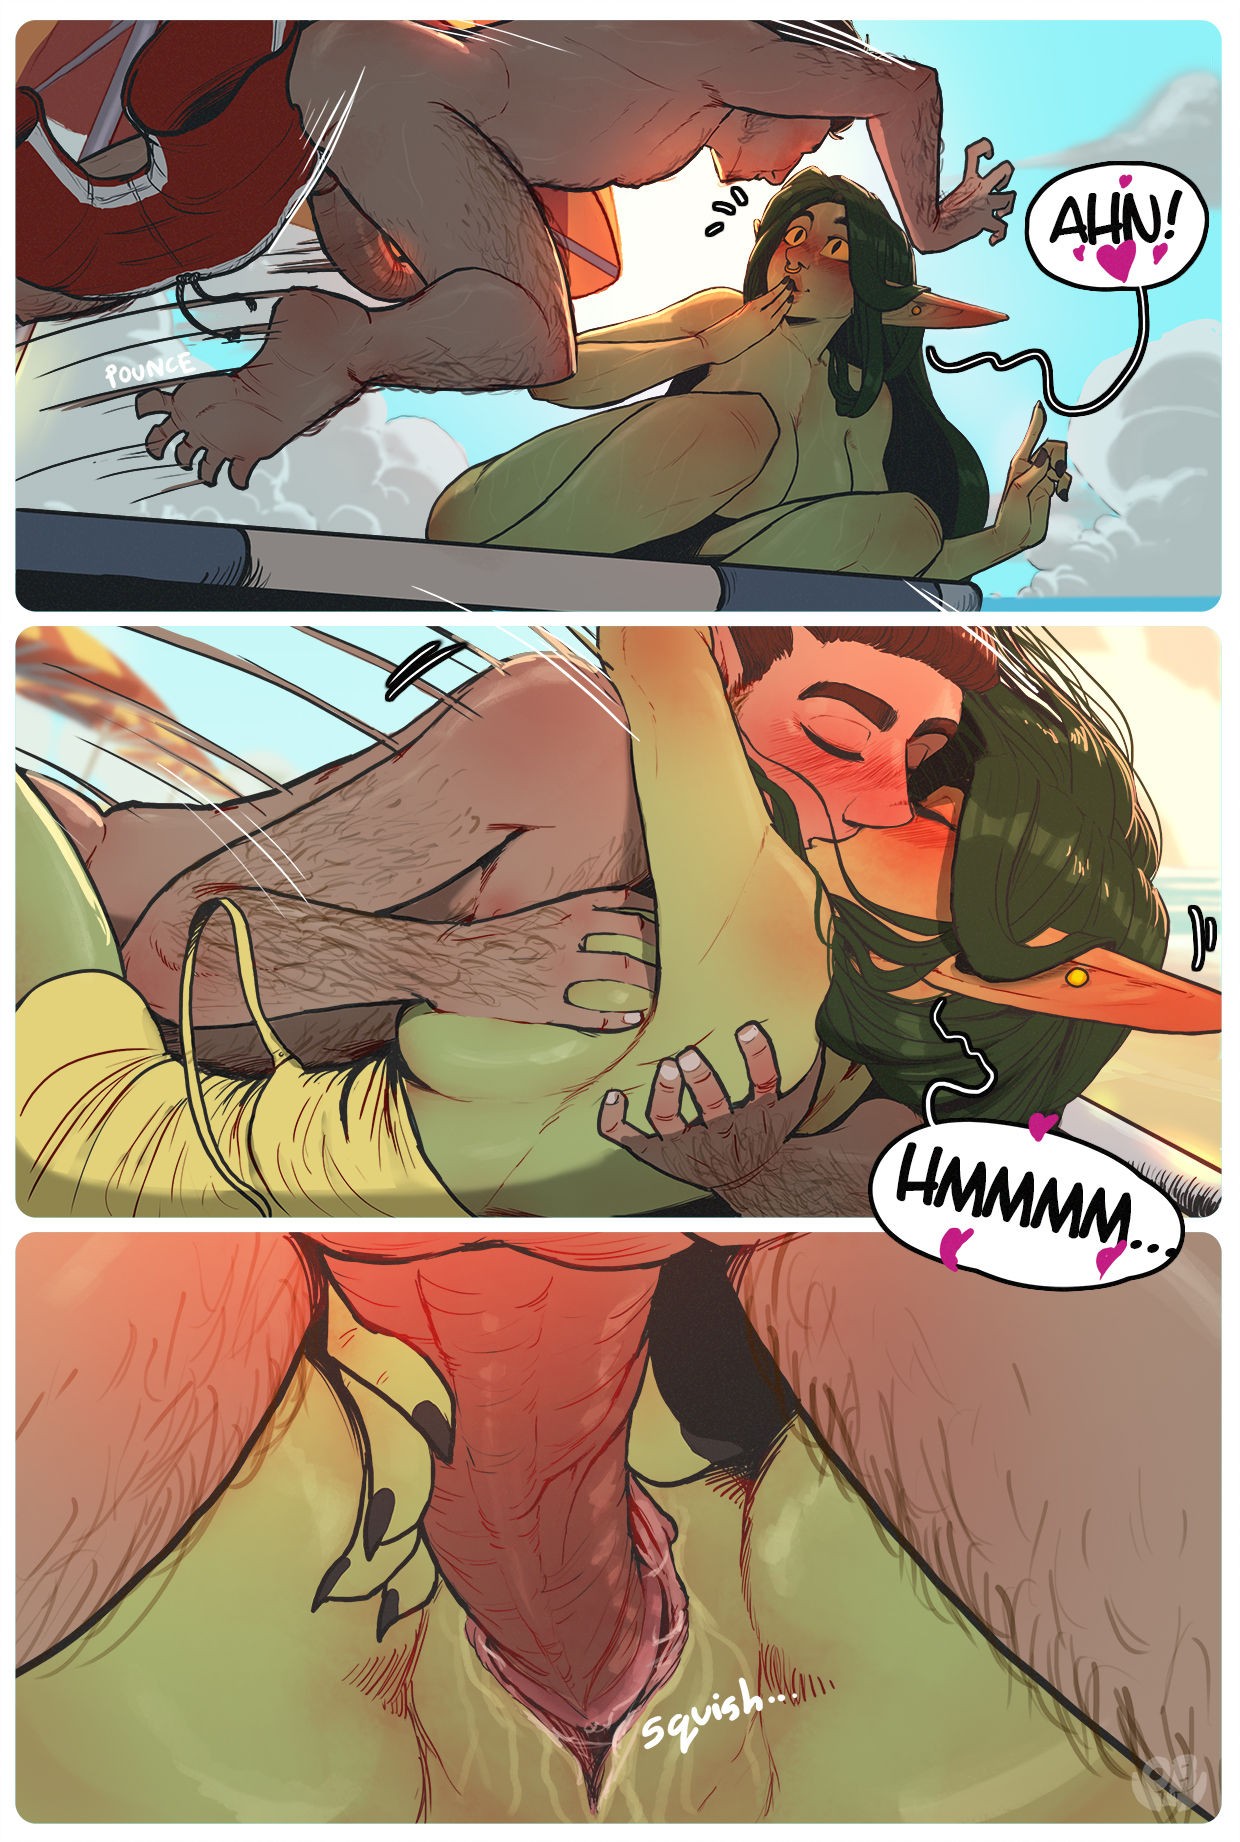 Nott the Thicc – Beach Day in Xhorhas - d3cf0424512e543b1e79216124765453